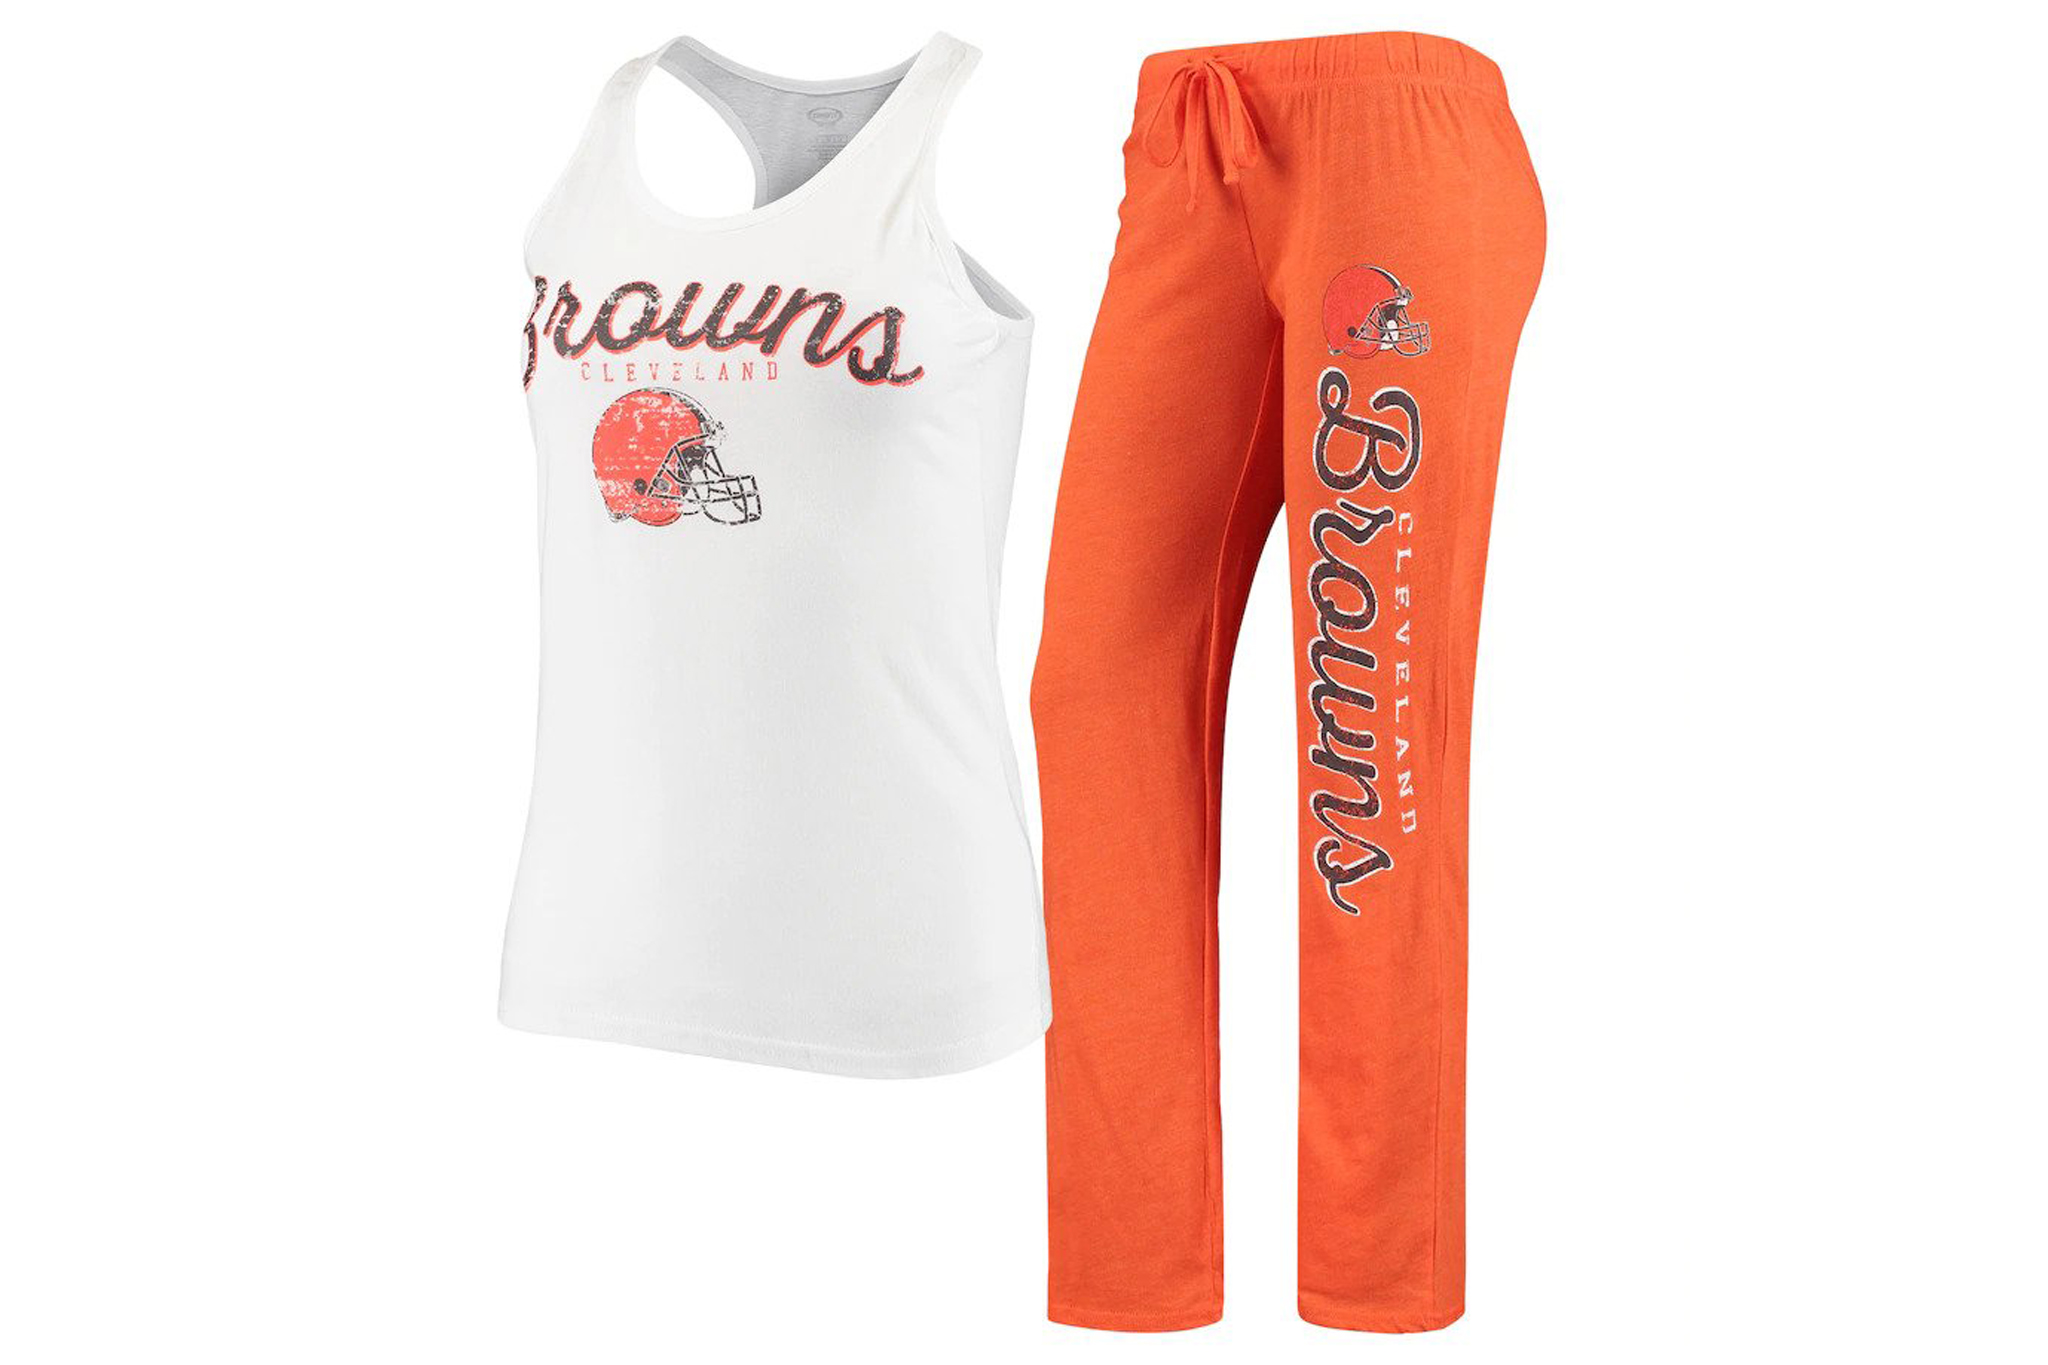 where to buy cleveland browns gear